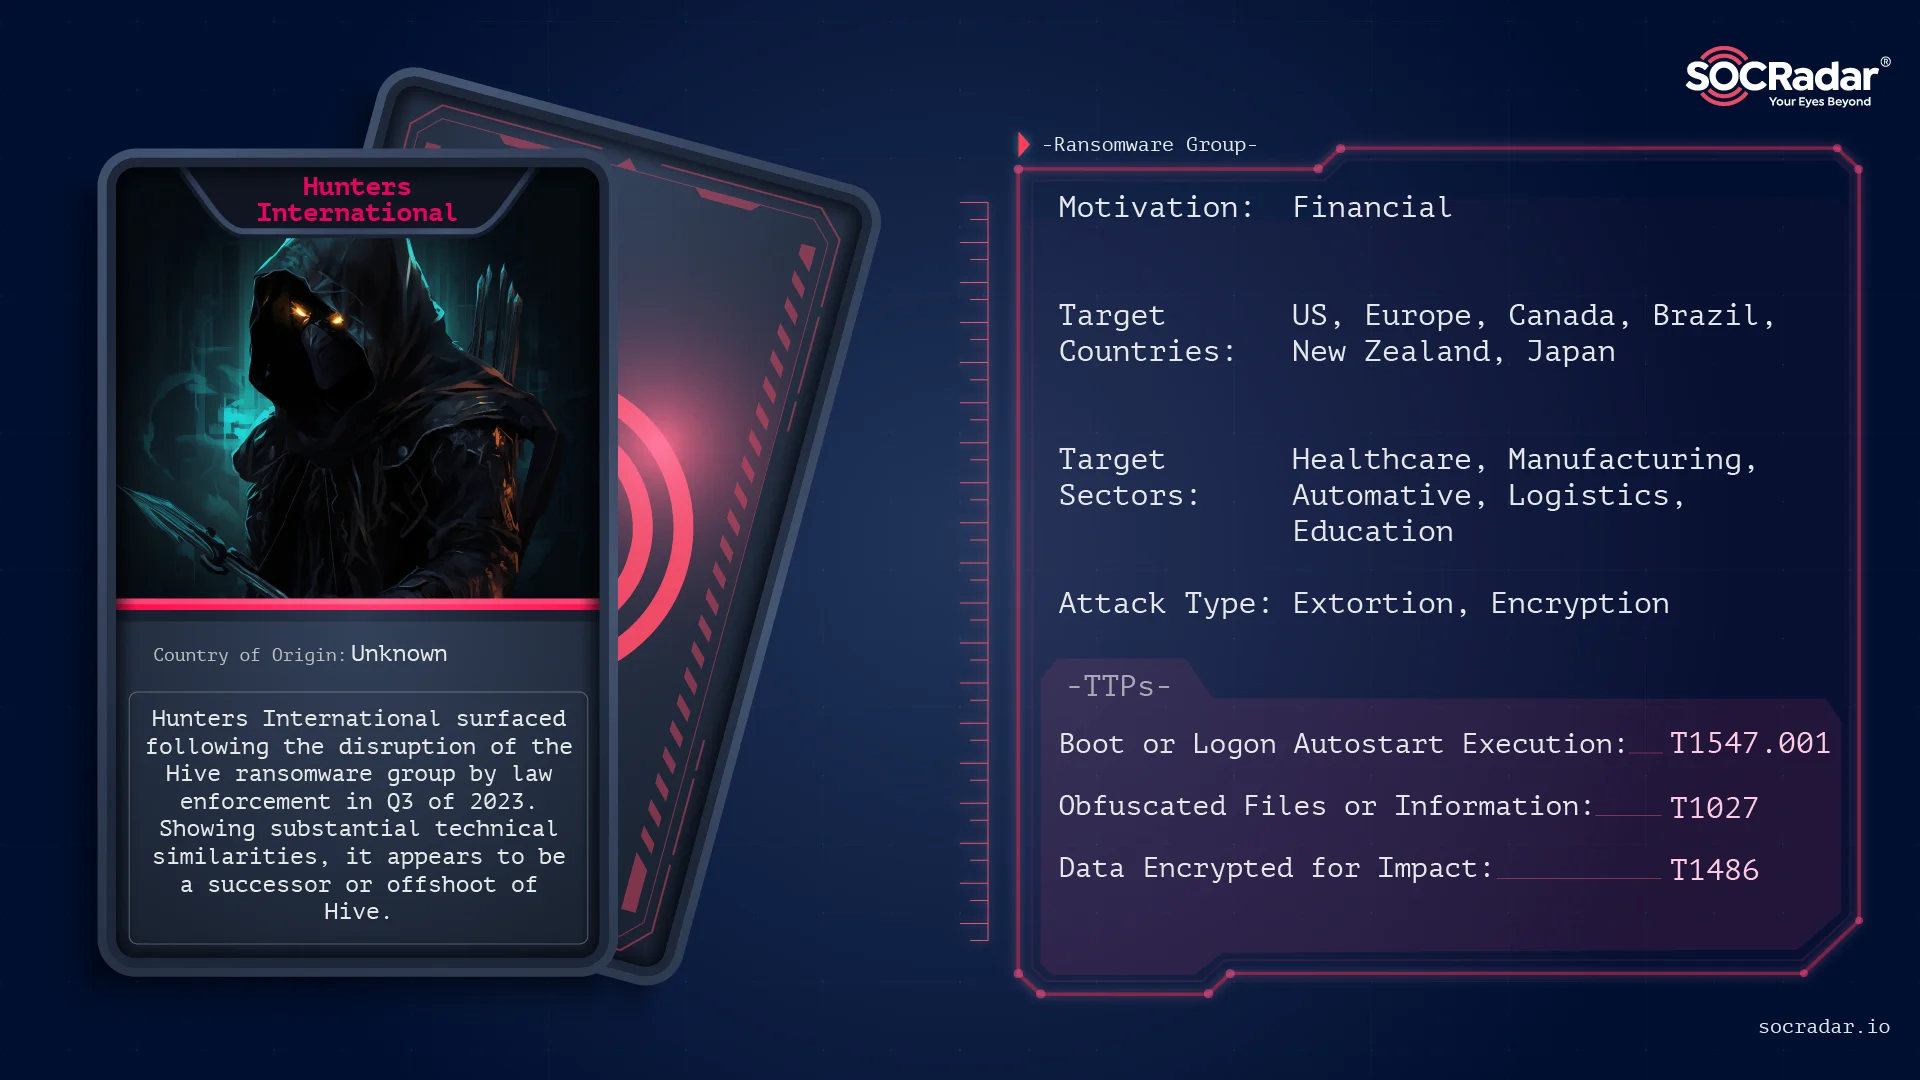 Threat Actor Card for Hunters International